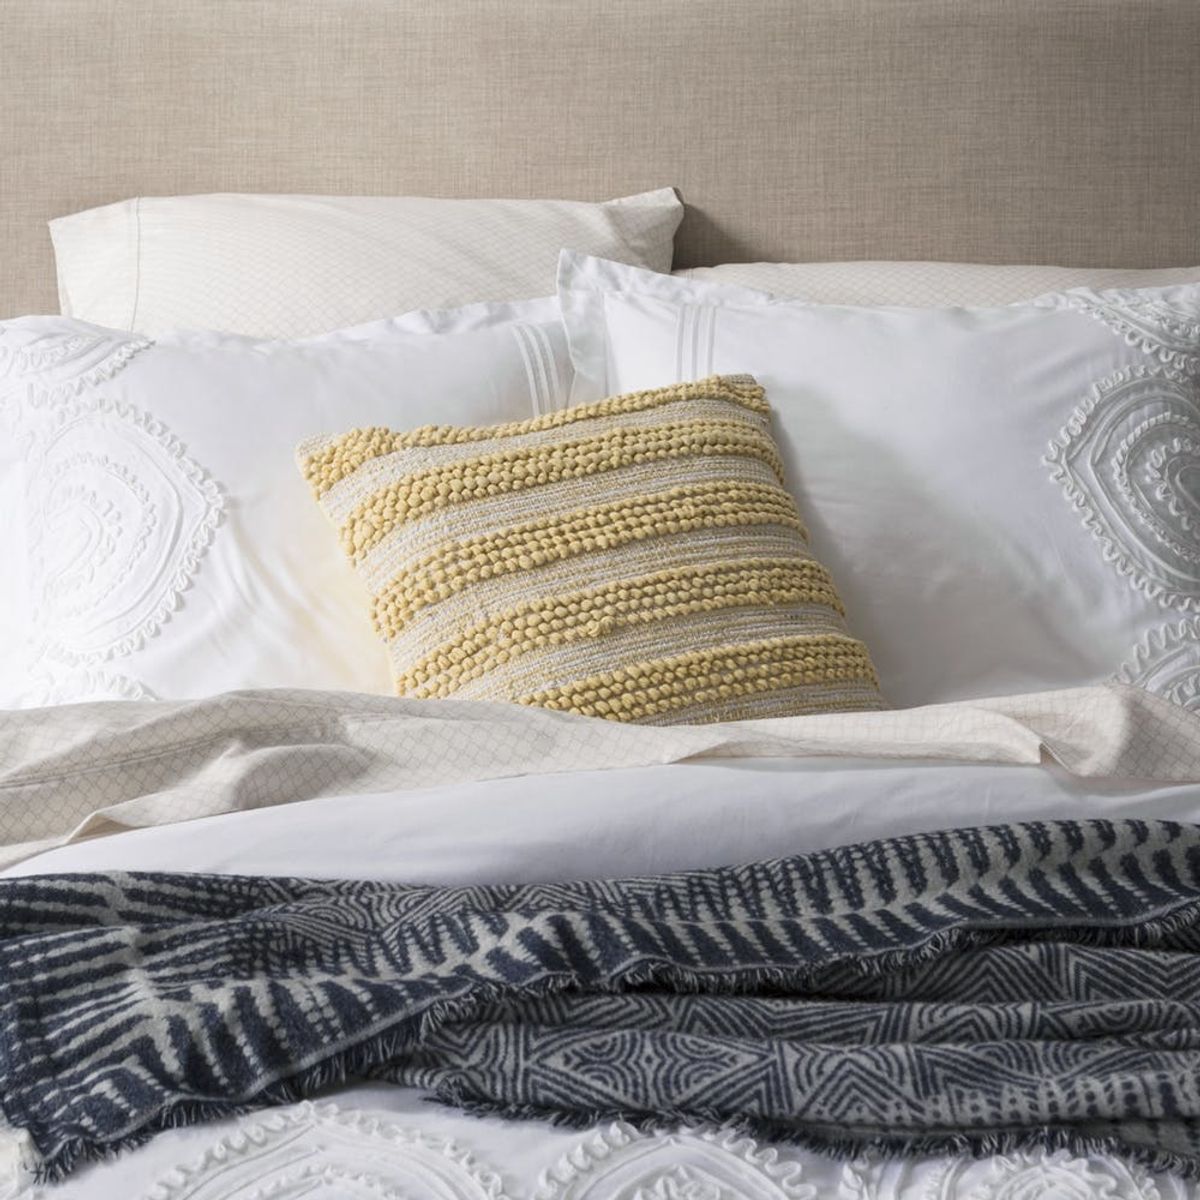 Wayfair’s Latest Bedding Collection Has Us Ready to Snuggle Up for Fall